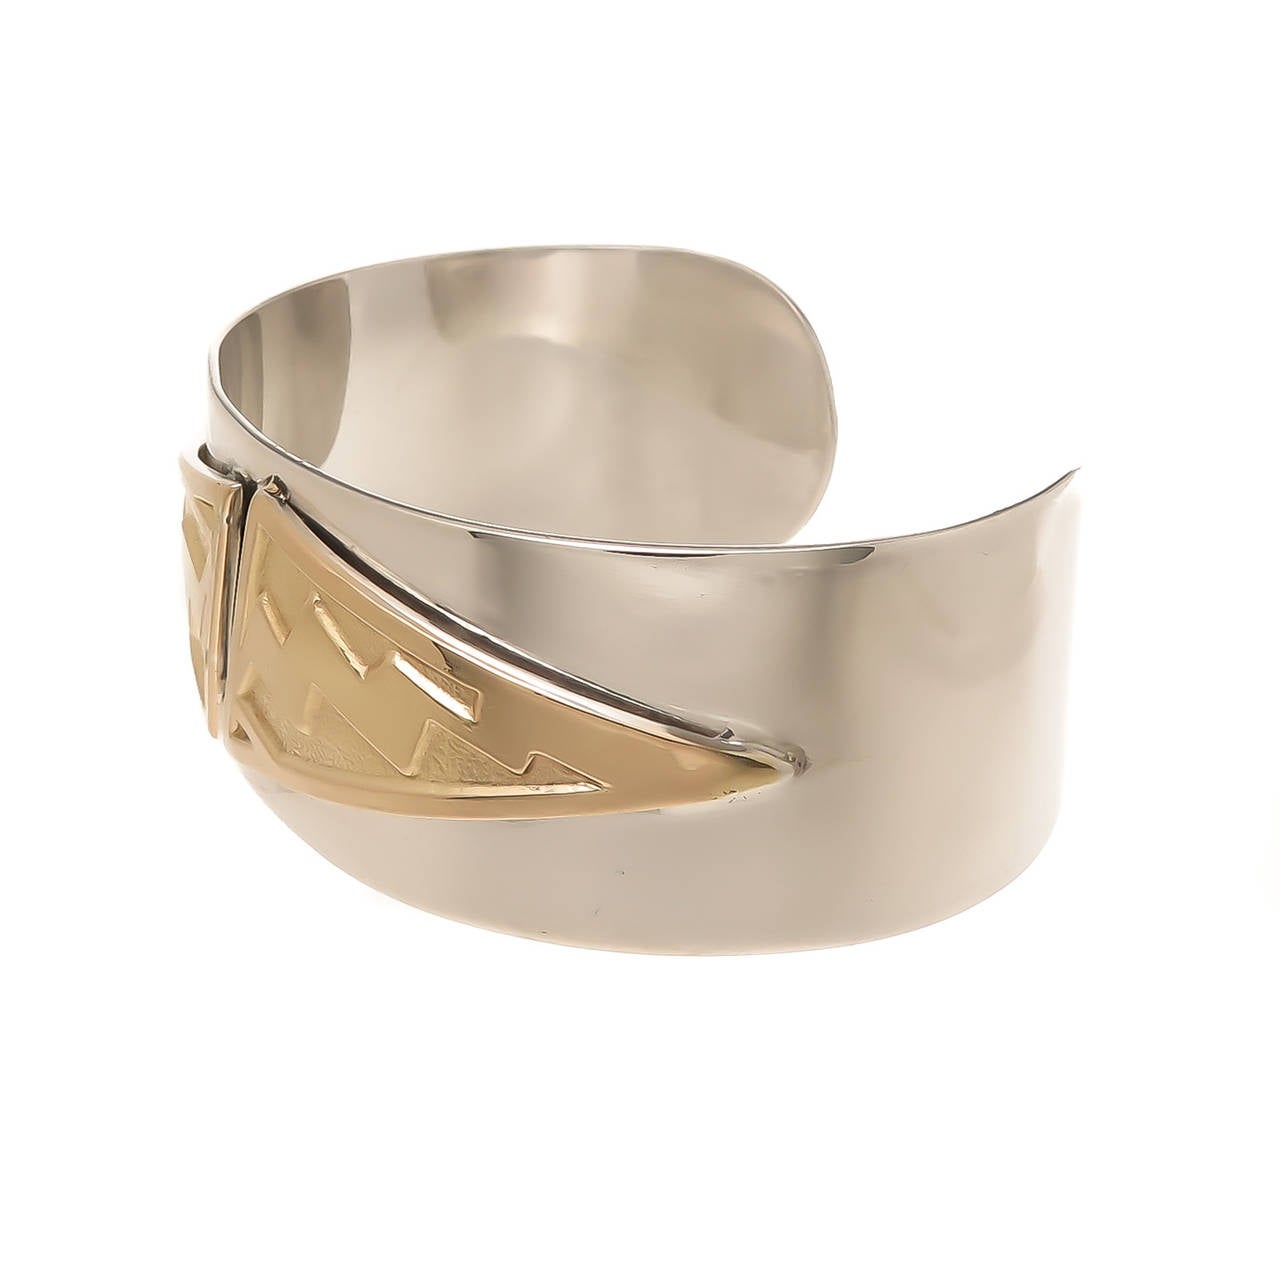 Circa 1970s ILias LaLaounis Sterling Silver and 18K Yellow Gold Cuff Bracelet, measuring 1 Inch wide and has a 1 1/8 inch wide opening and is pliable to bend and fit most any wrist.